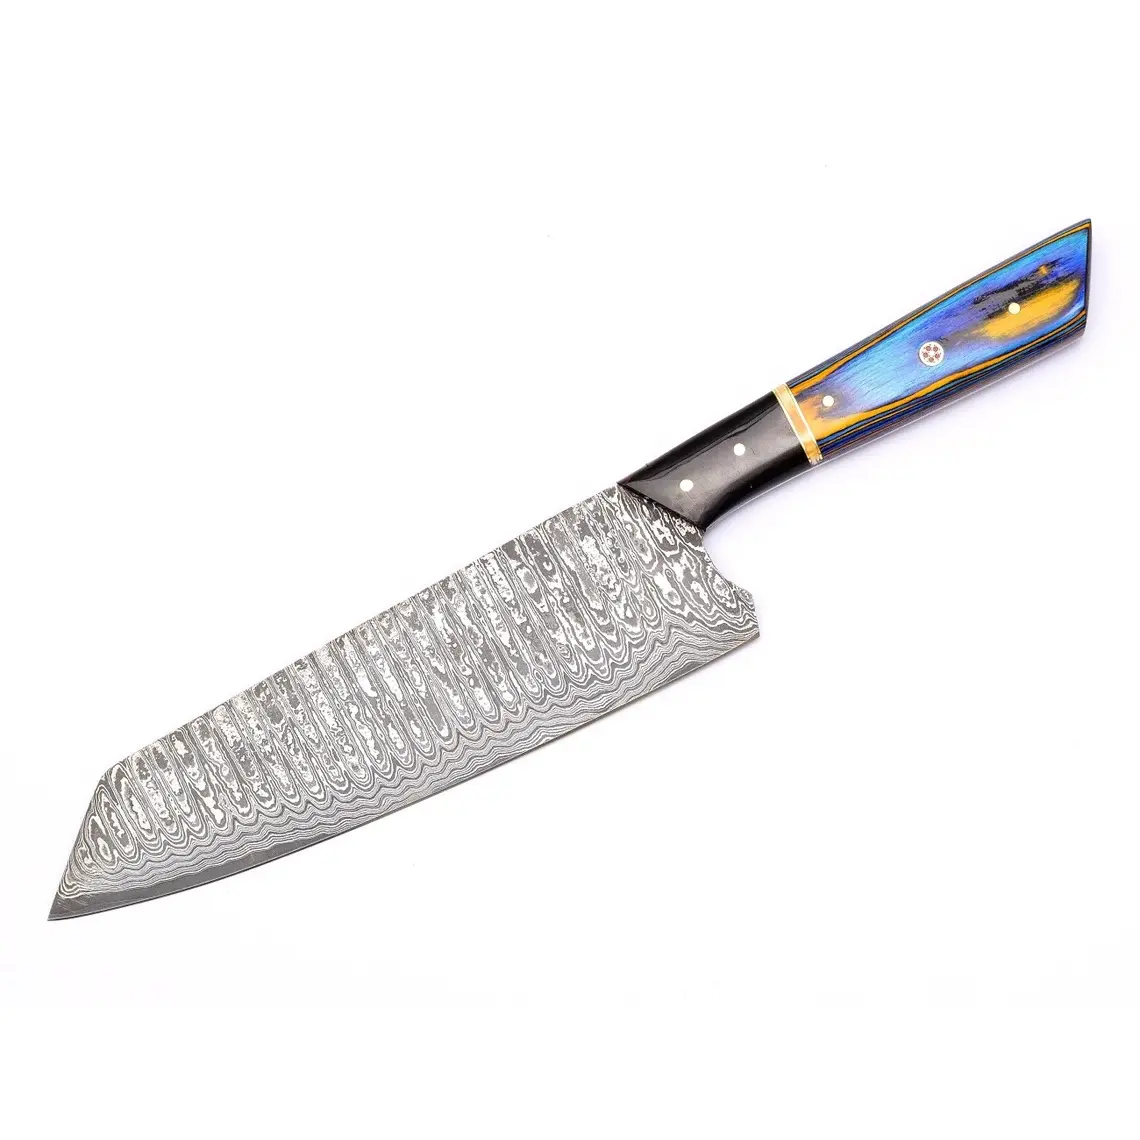 Handmade Damascus Steel Chef Knife Hand Forged Japanese Bunka Kitchen Knife With Leather Kit